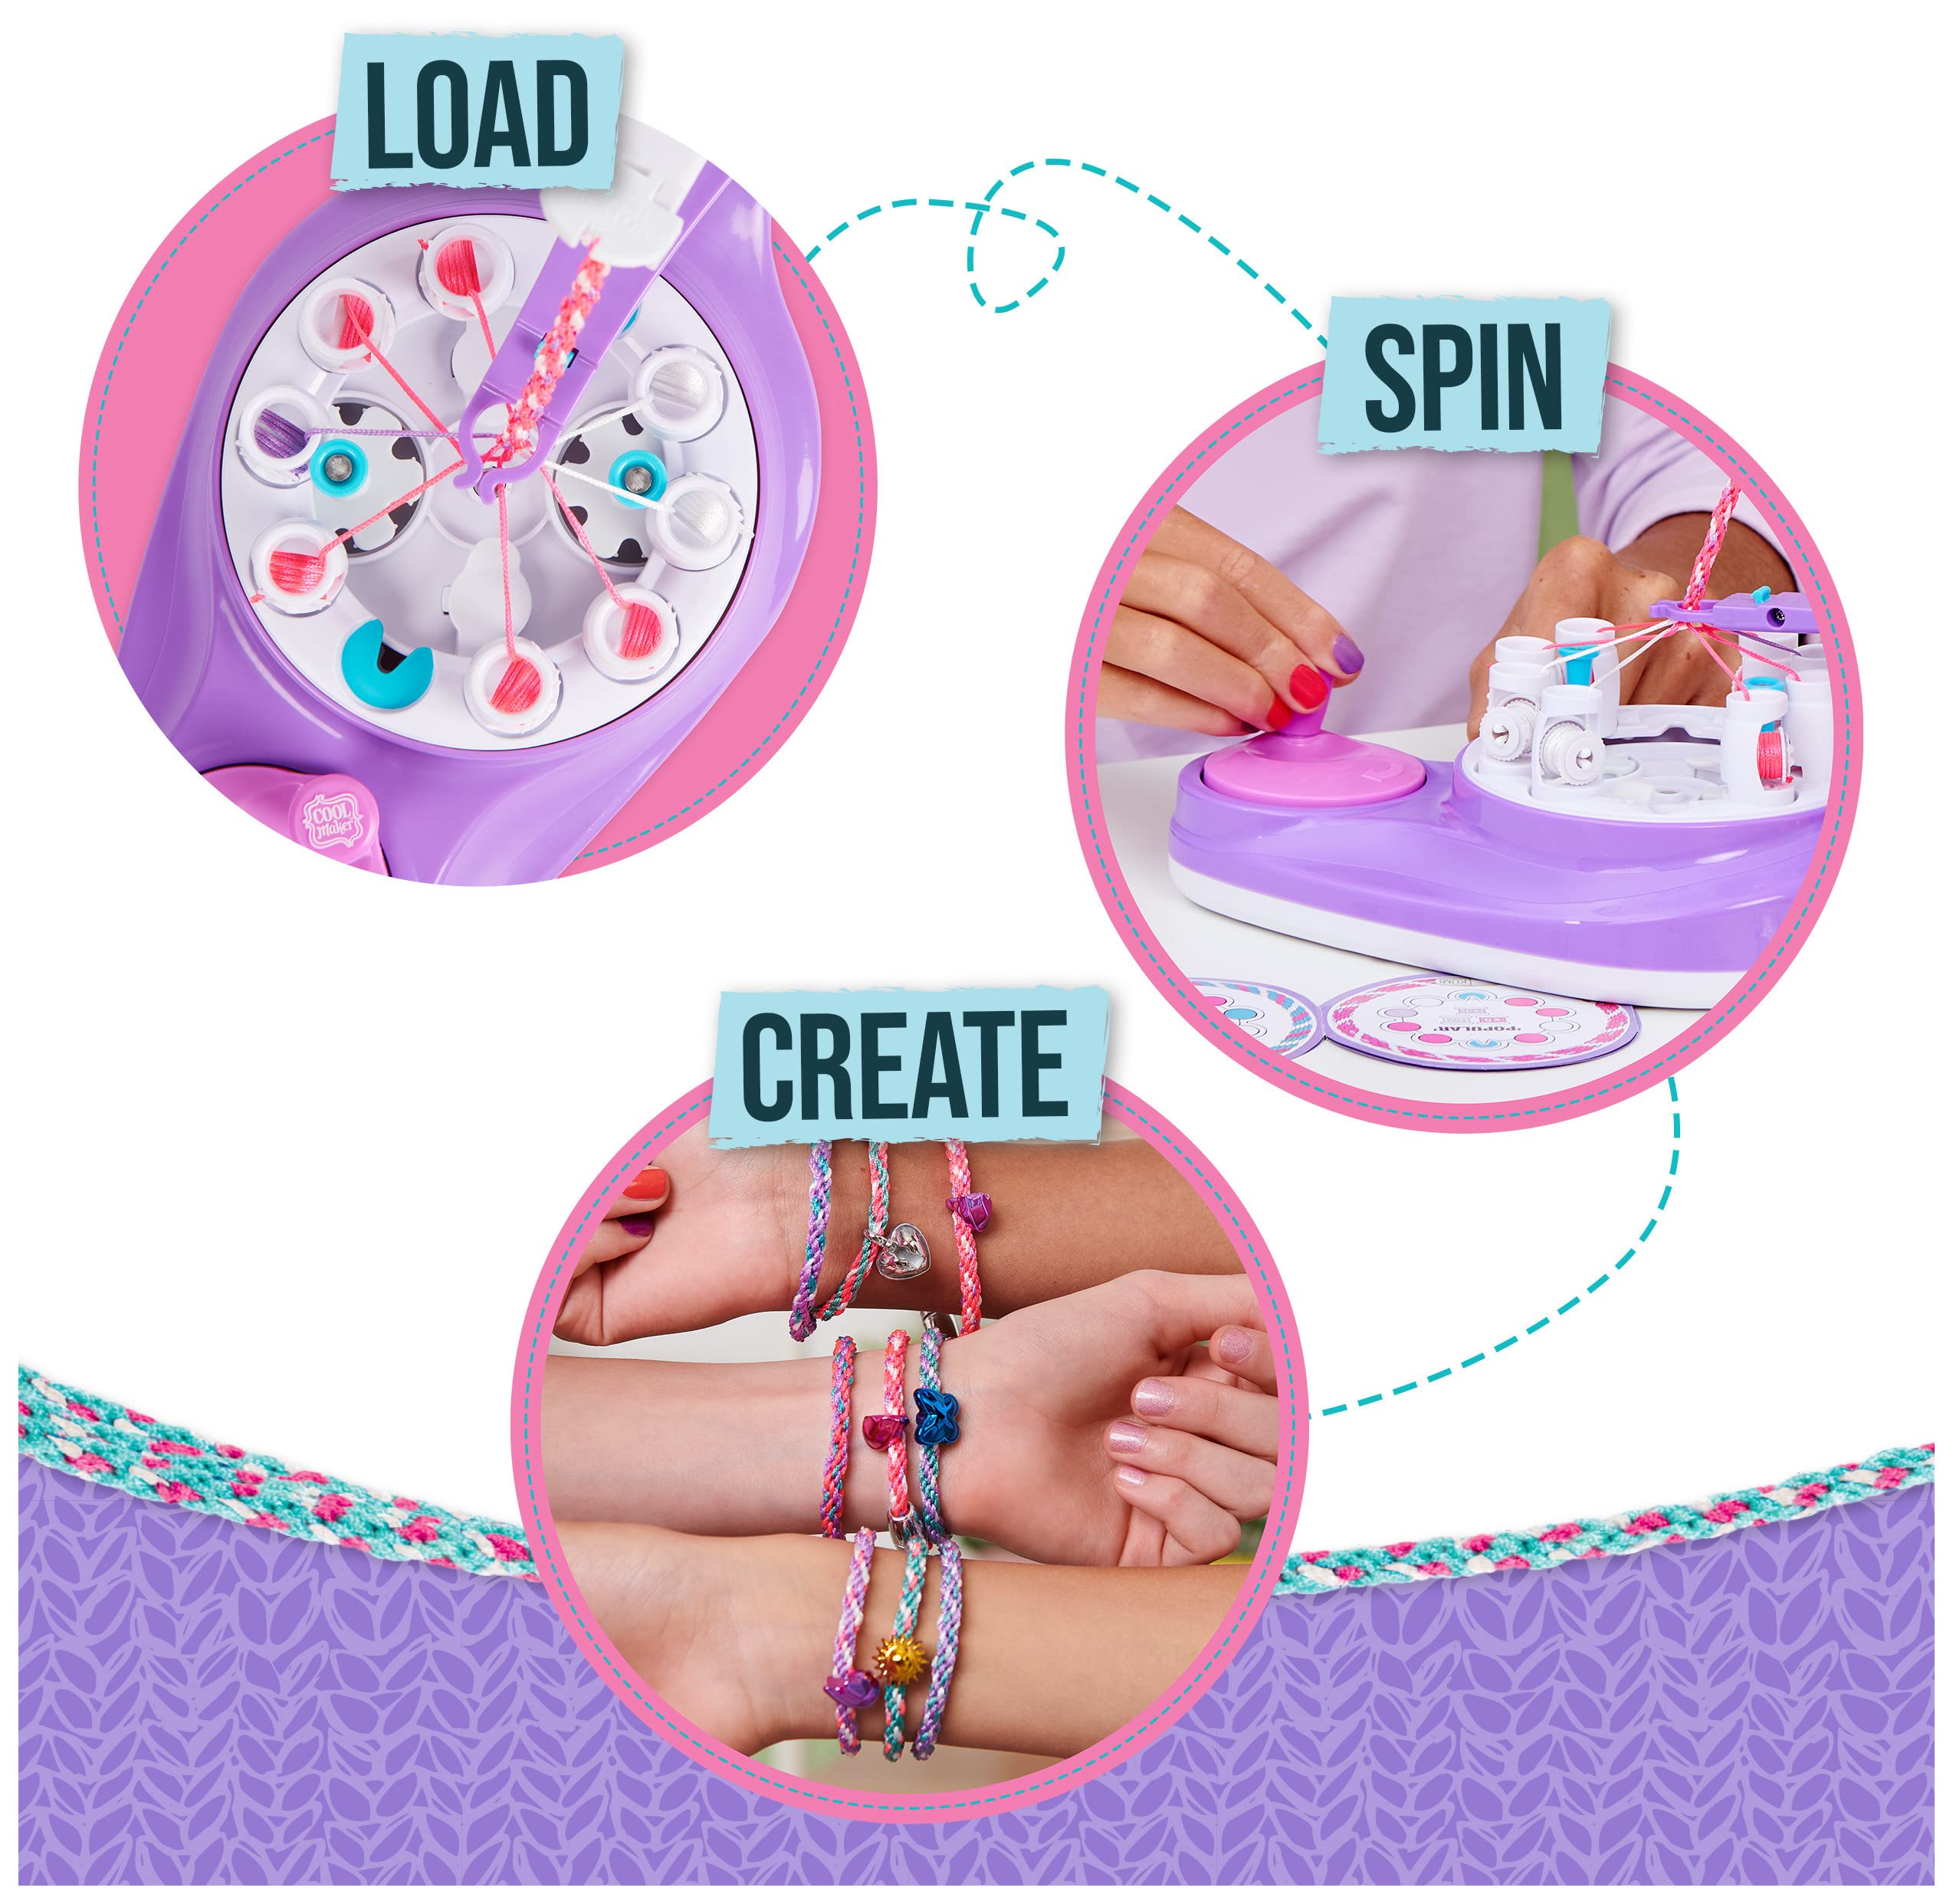 Cool Maker, 2-in-1 KumiKreator, Necklace and Friendship Bracelet Maker  Activity Kit, for Ages 8 and Up